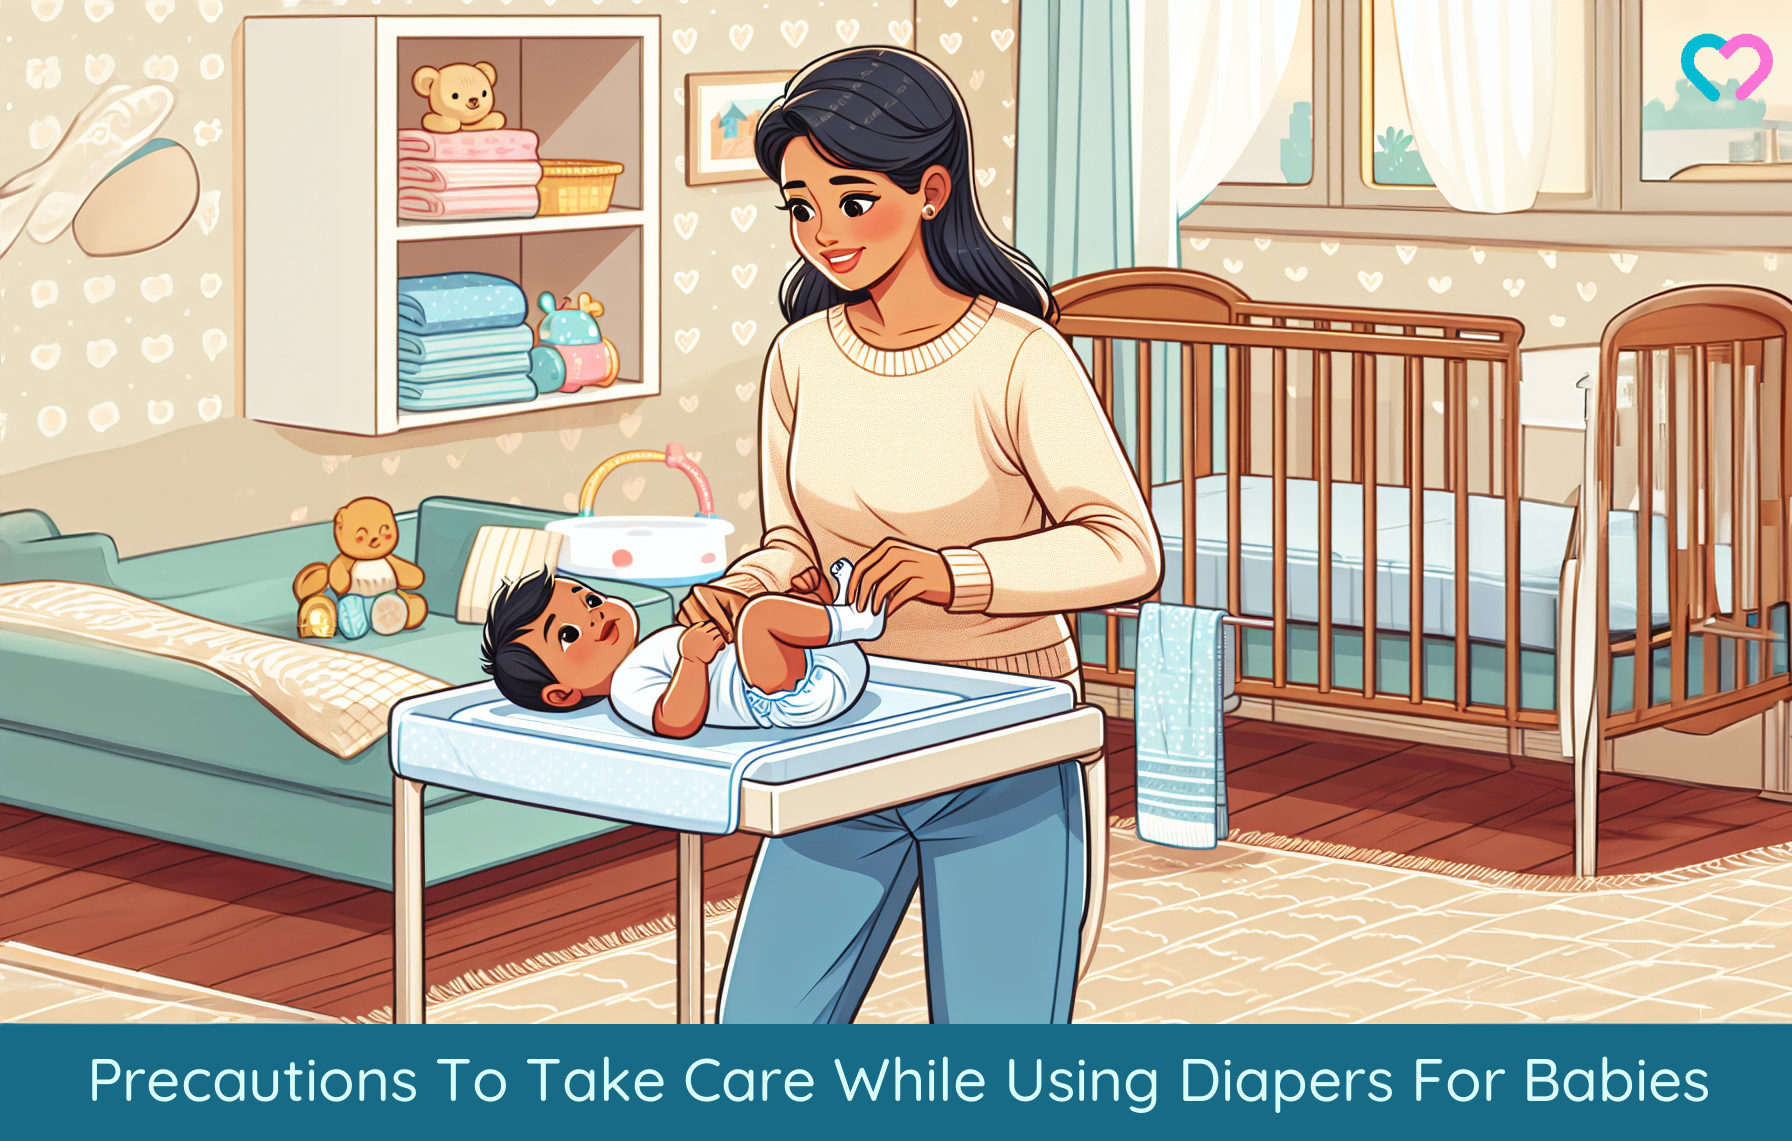 diapers for babies_illustration